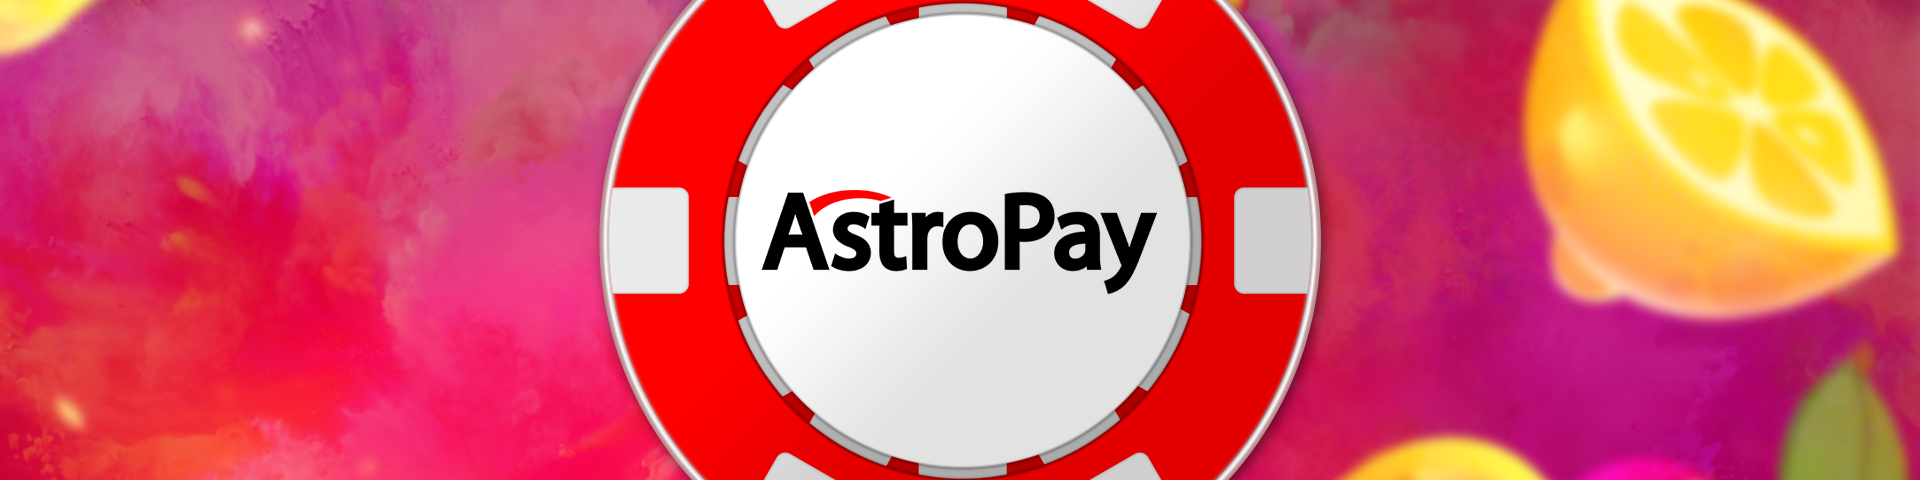 AstroPay Casino Payment Method